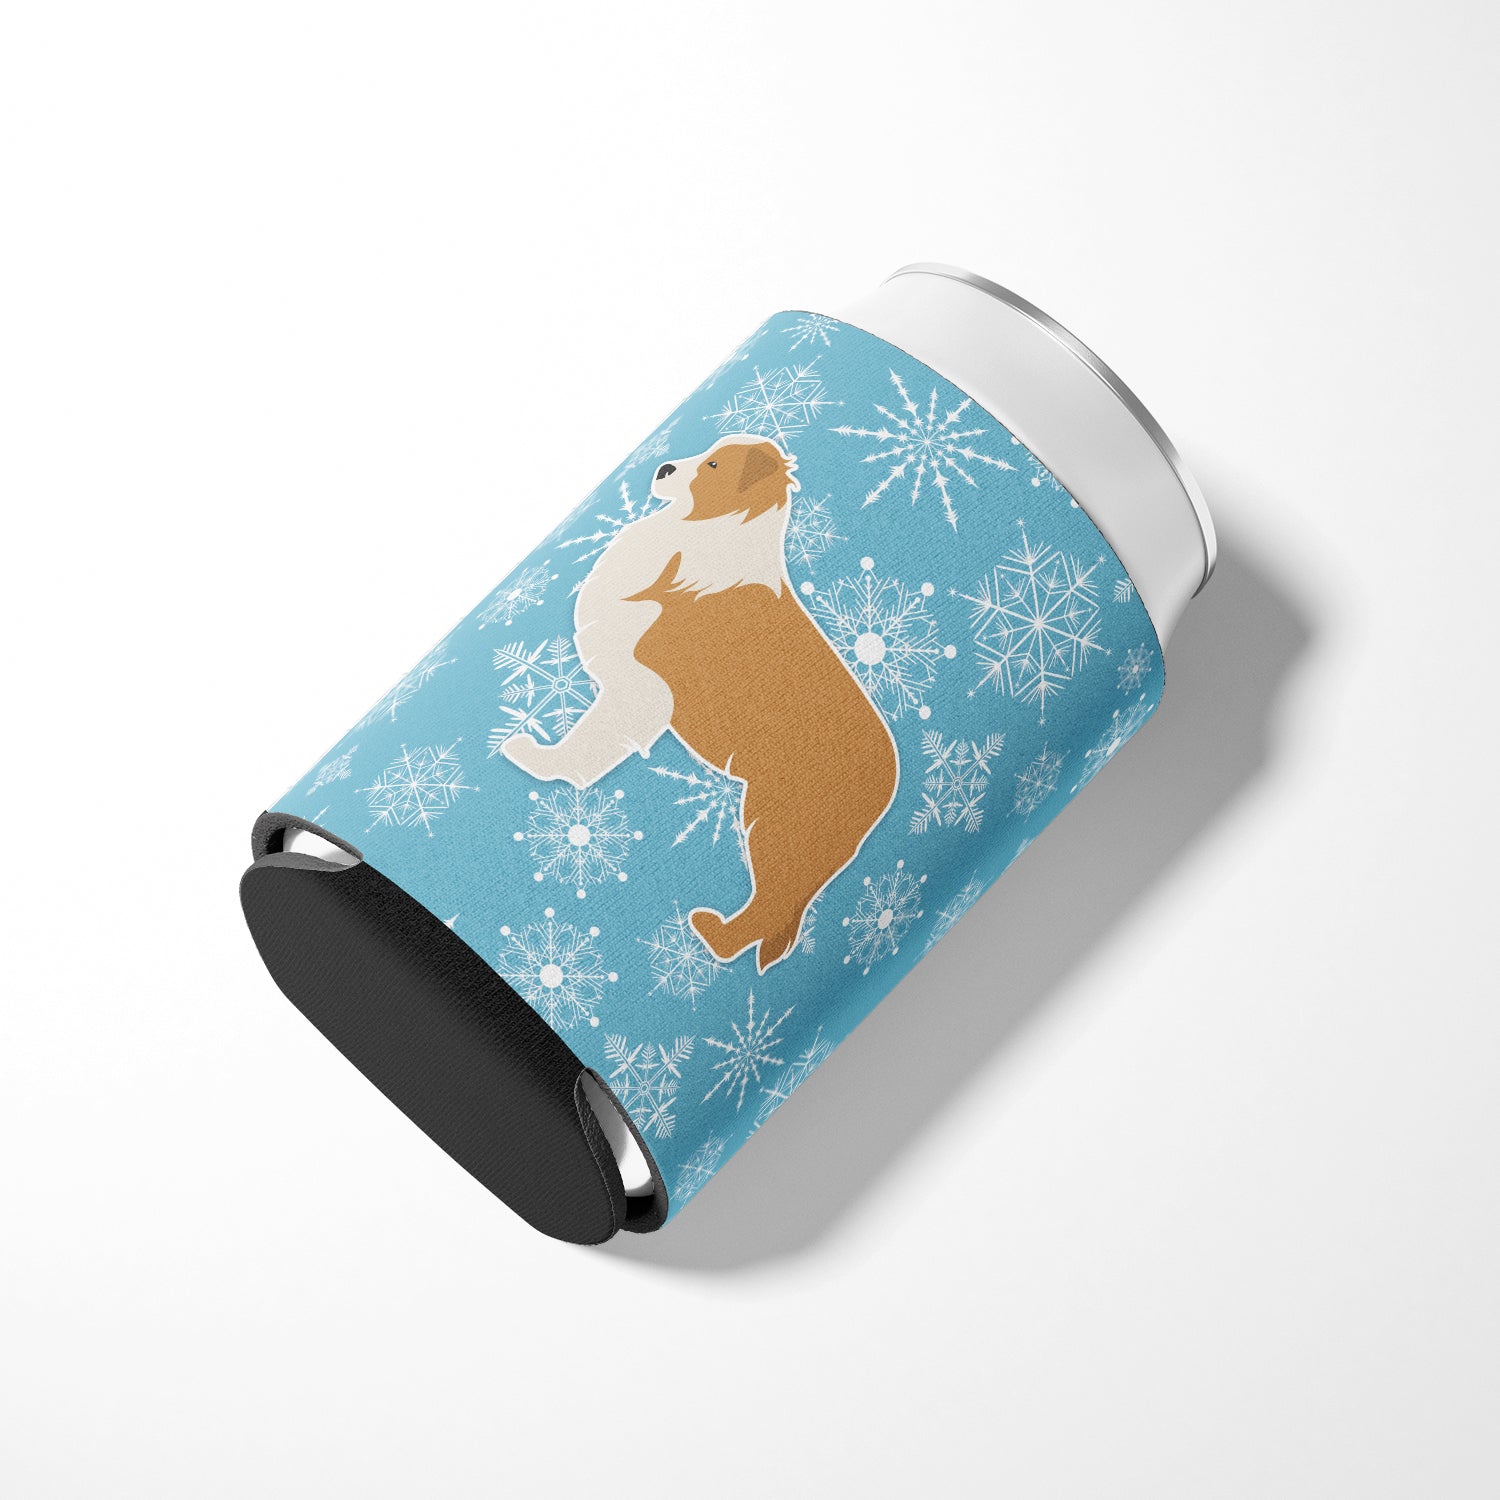 Winter Snowflake Red Border Collie Can or Bottle Hugger BB3522CC